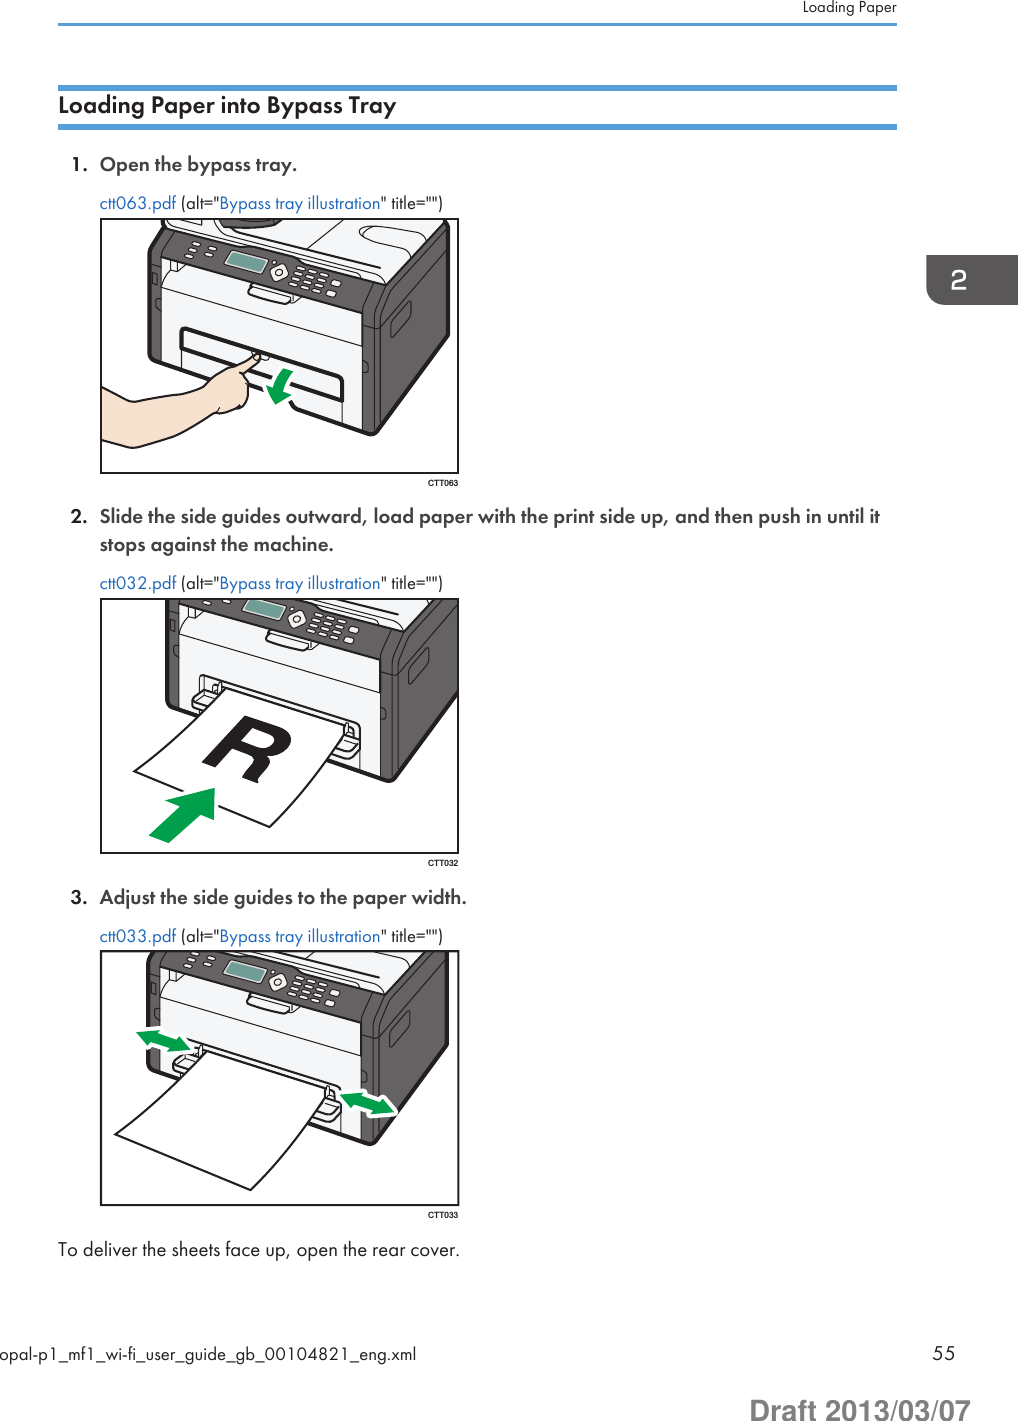 Loading Paper into Bypass Tray1. Open the bypass tray.ctt063.pdf (alt=&quot;Bypass tray illustration&quot; title=&quot;&quot;)CTT0632. Slide the side guides outward, load paper with the print side up, and then push in until itstops against the machine.ctt032.pdf (alt=&quot;Bypass tray illustration&quot; title=&quot;&quot;)CTT0323. Adjust the side guides to the paper width.ctt033.pdf (alt=&quot;Bypass tray illustration&quot; title=&quot;&quot;)CTT033To deliver the sheets face up, open the rear cover.Loading Paperopal-p1_mf1_wi-fi_user_guide_gb_00104821_eng.xml 55Draft 2013/03/07